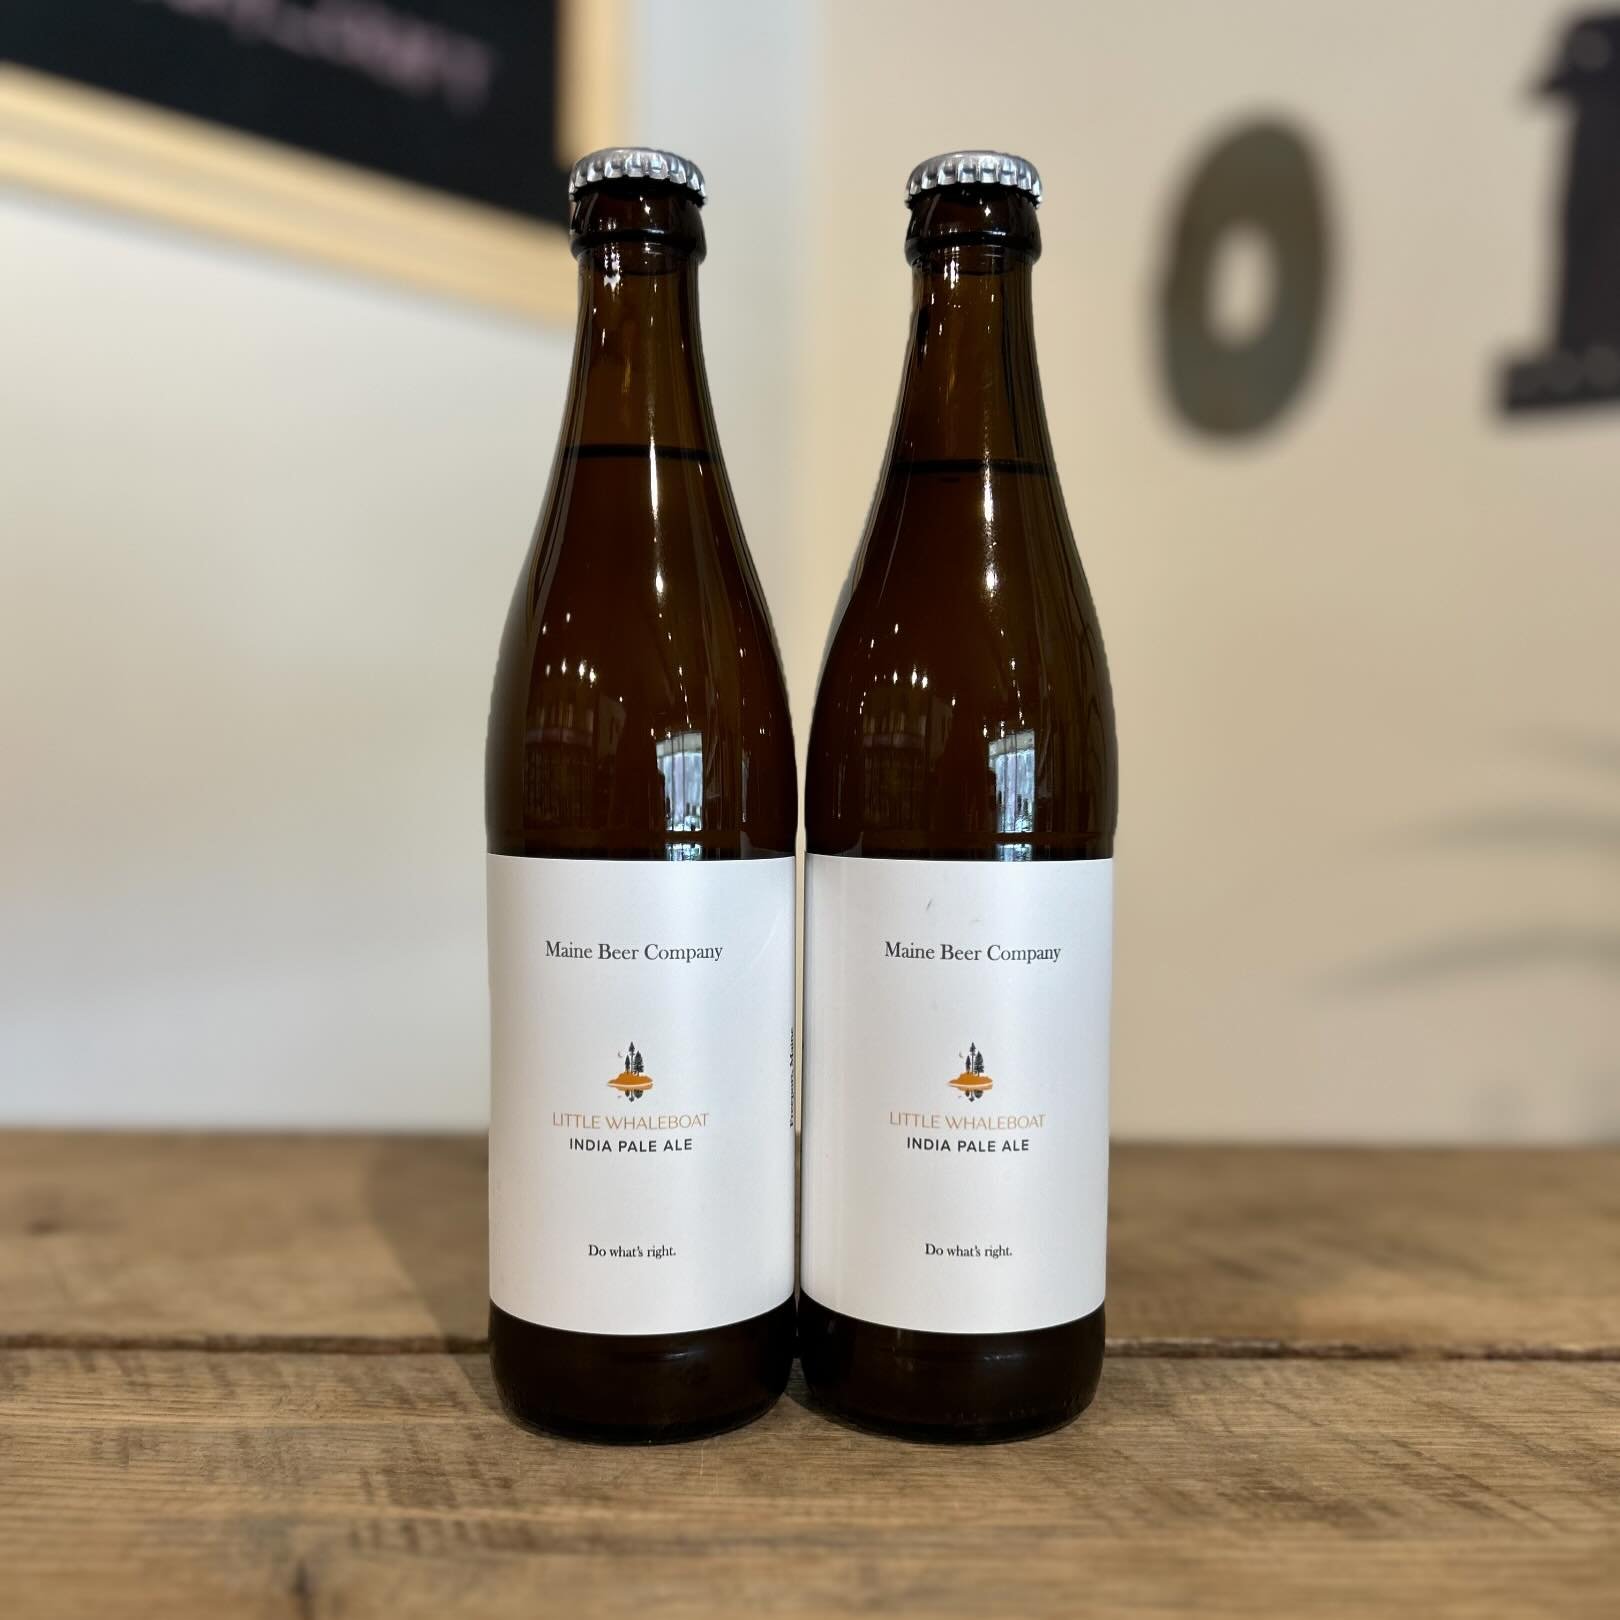 Fresh @mainebeerco #NowAvailable #SudburyCraftBeer #SudburyMA
&mdash;
Little Whaleboat Islands (made up of Little Whaleboat, Nate and Tuck) are a cluster of 3 small islands and ledges in Casco Bay, a vital link in the chain of protected islands conse